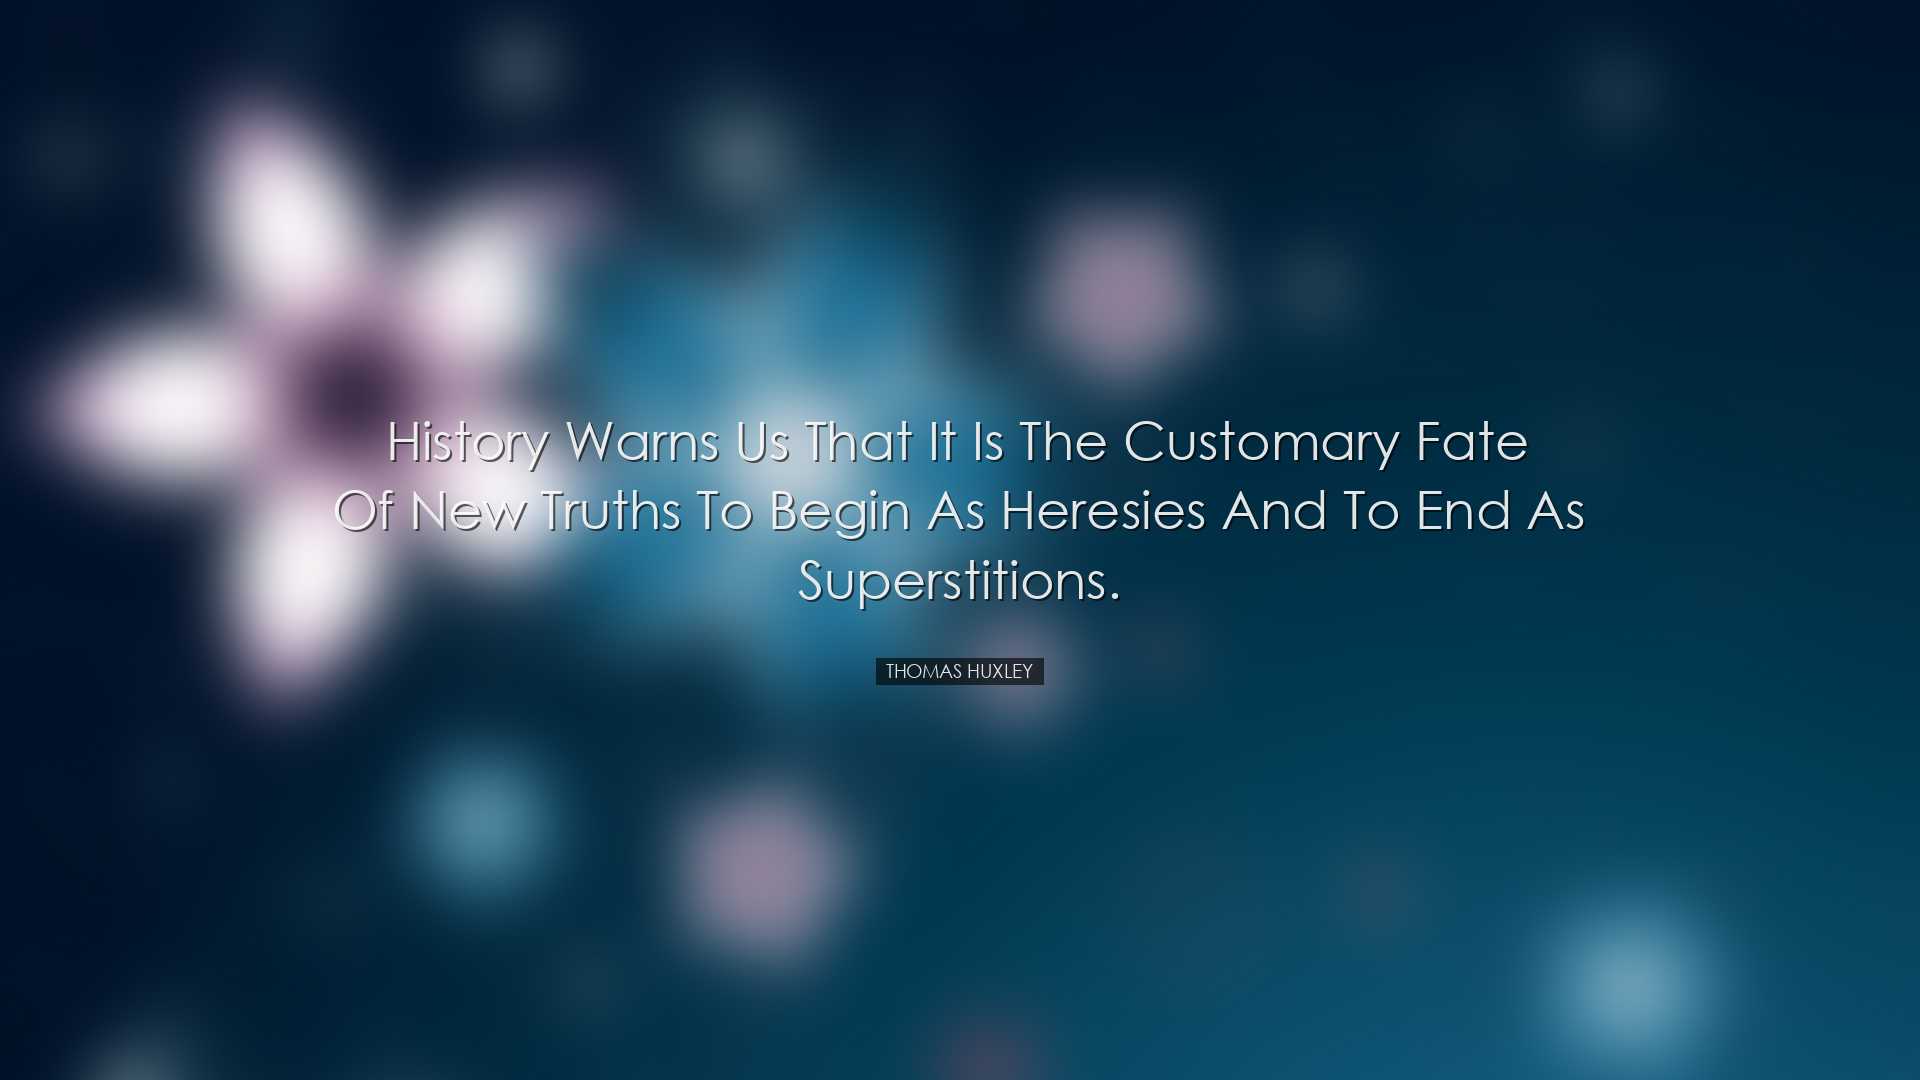 History warns us that it is the customary fate of new truths to be